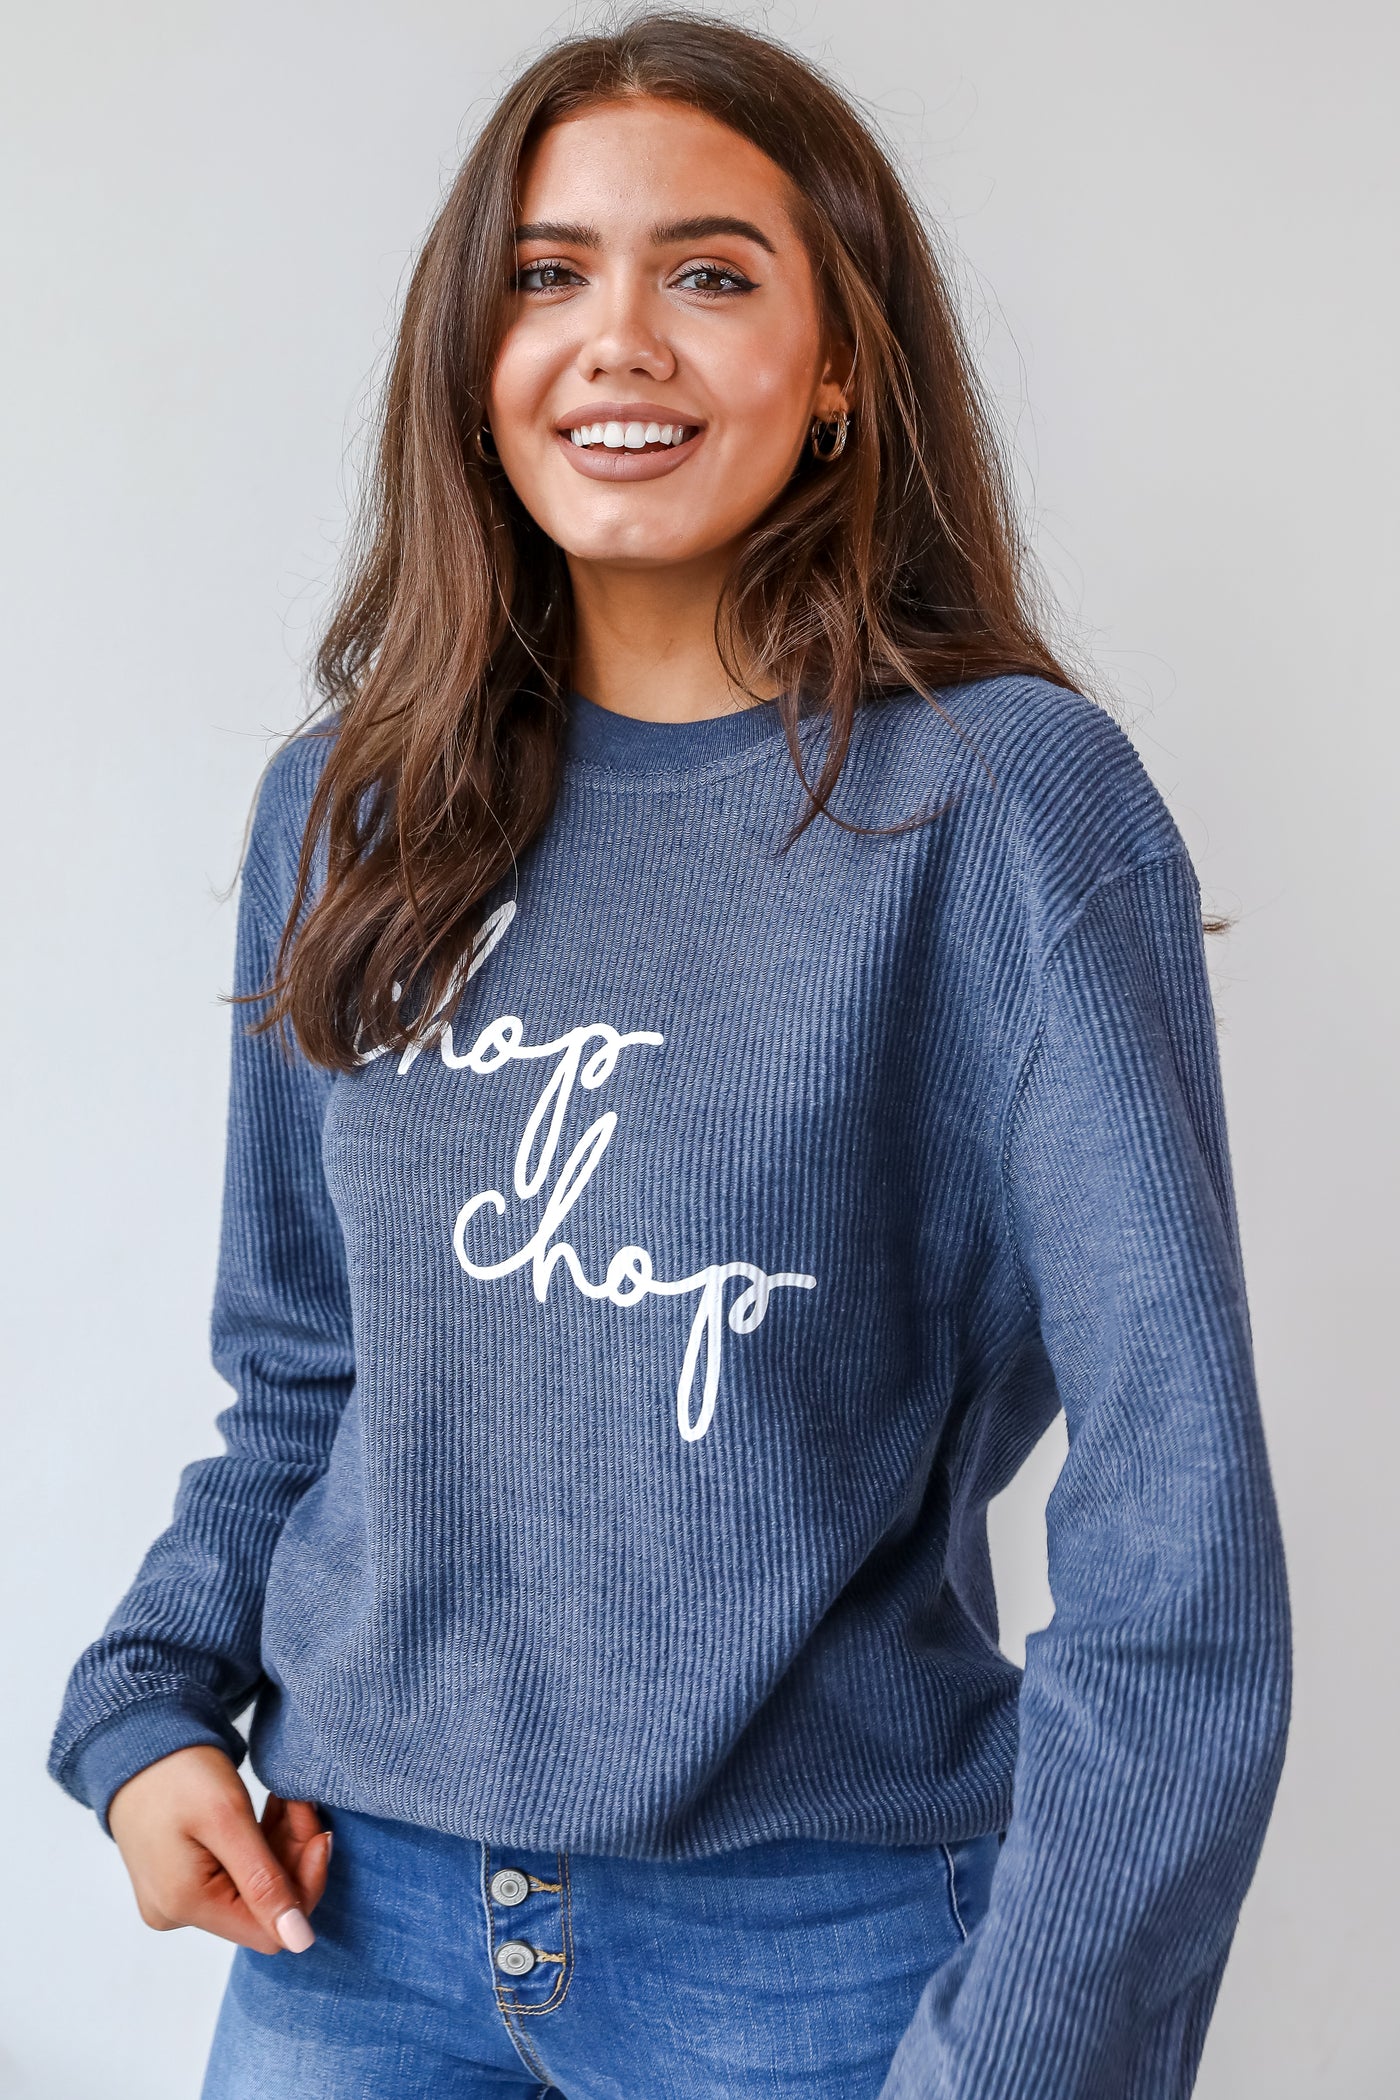 This comfy sweatshirt is designed with a soft and stretchy corded knit. It features a crew neckline, long sleeves, an oversized fit, and the words "Chop Chop" on the front.